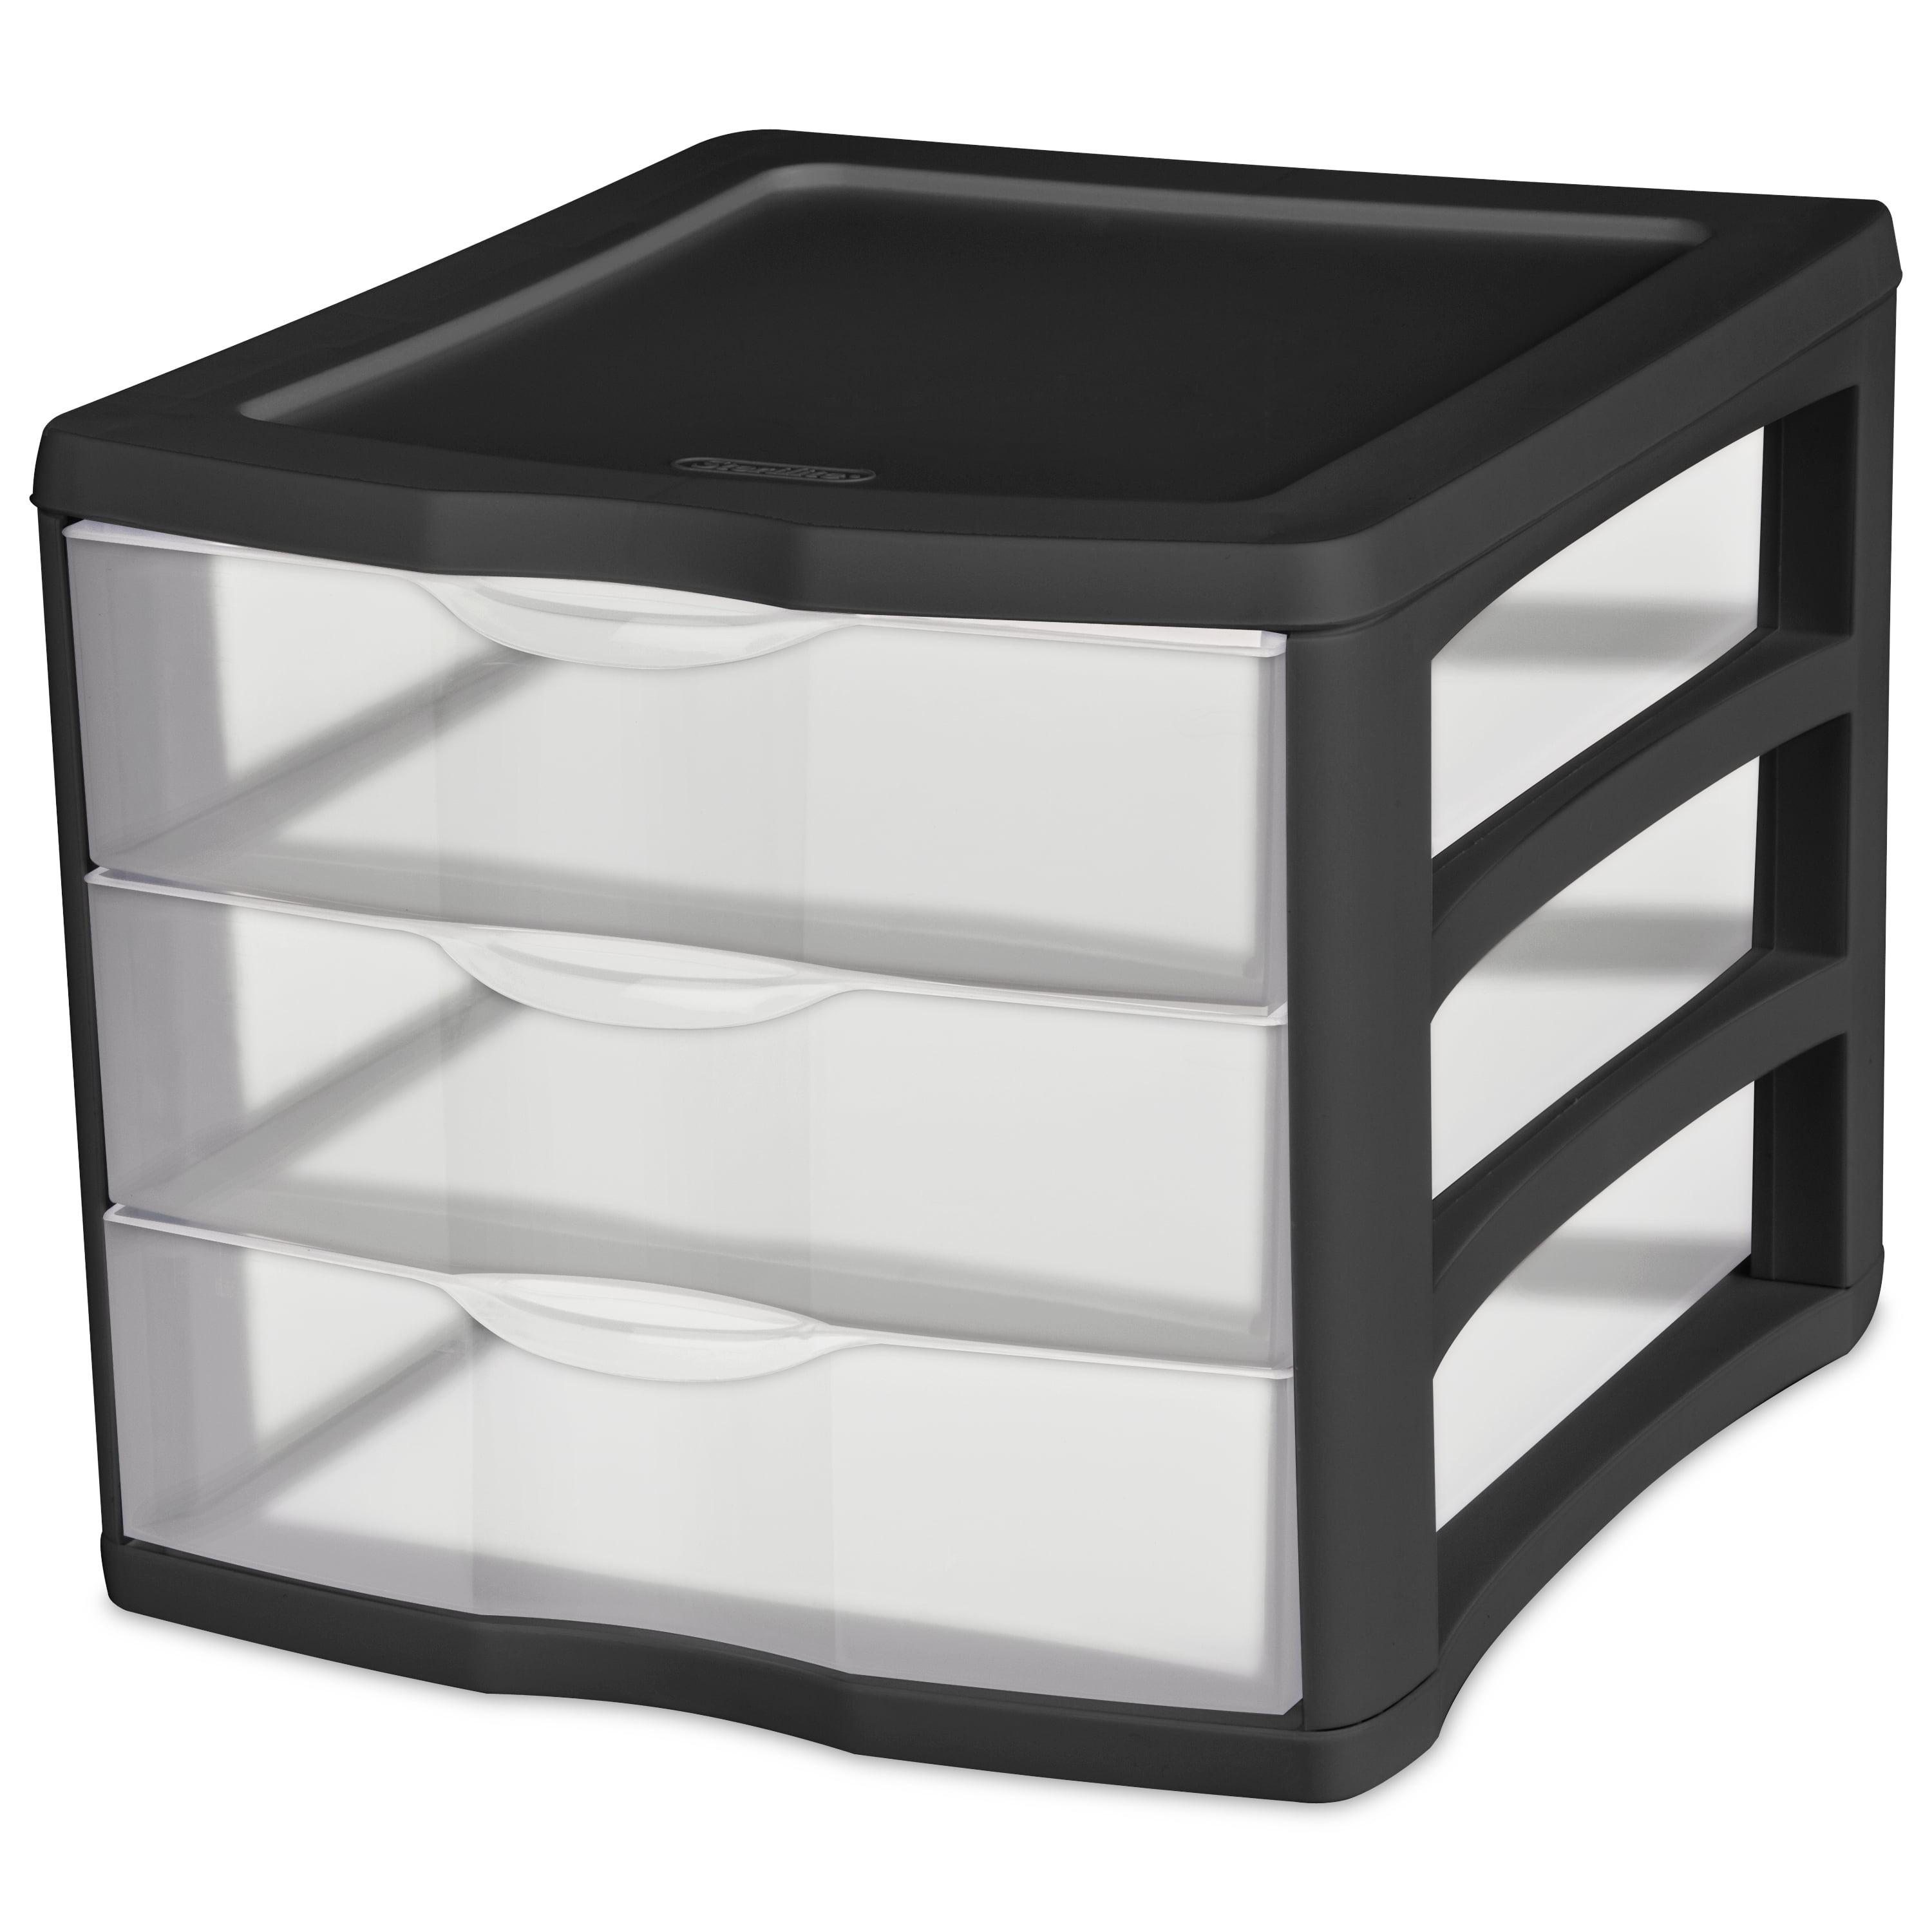 Black Frame with Clear Drawers and Cover Sterilite 20639004 3 Drawer Desktop Unit 4-Pack Sterilite-Massillon OH